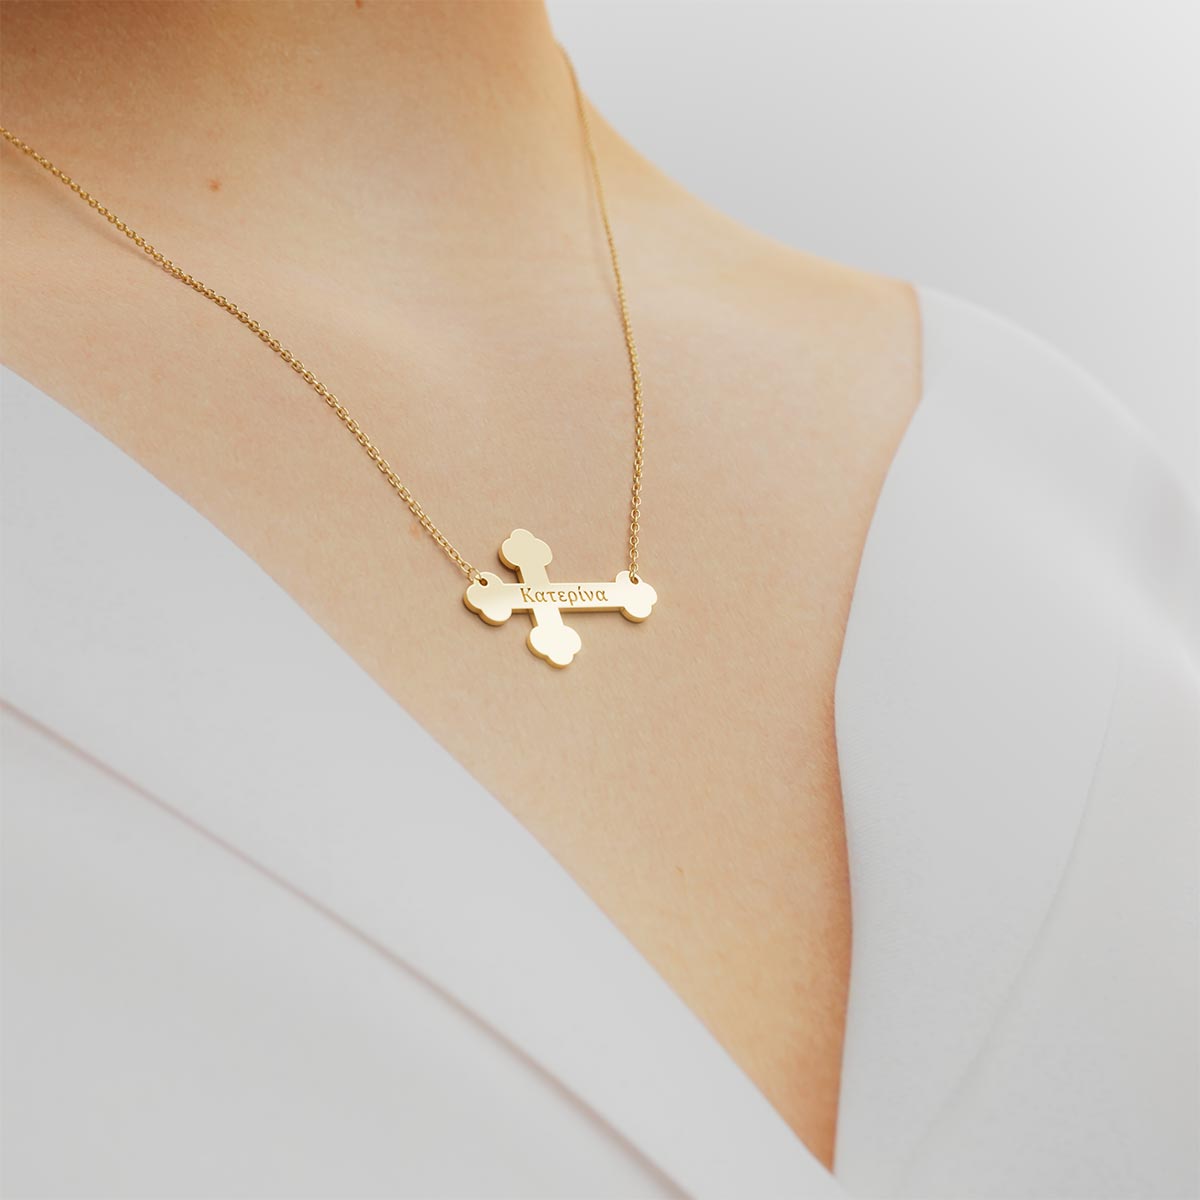 Sideways Cross Necklace With Greek Engraving